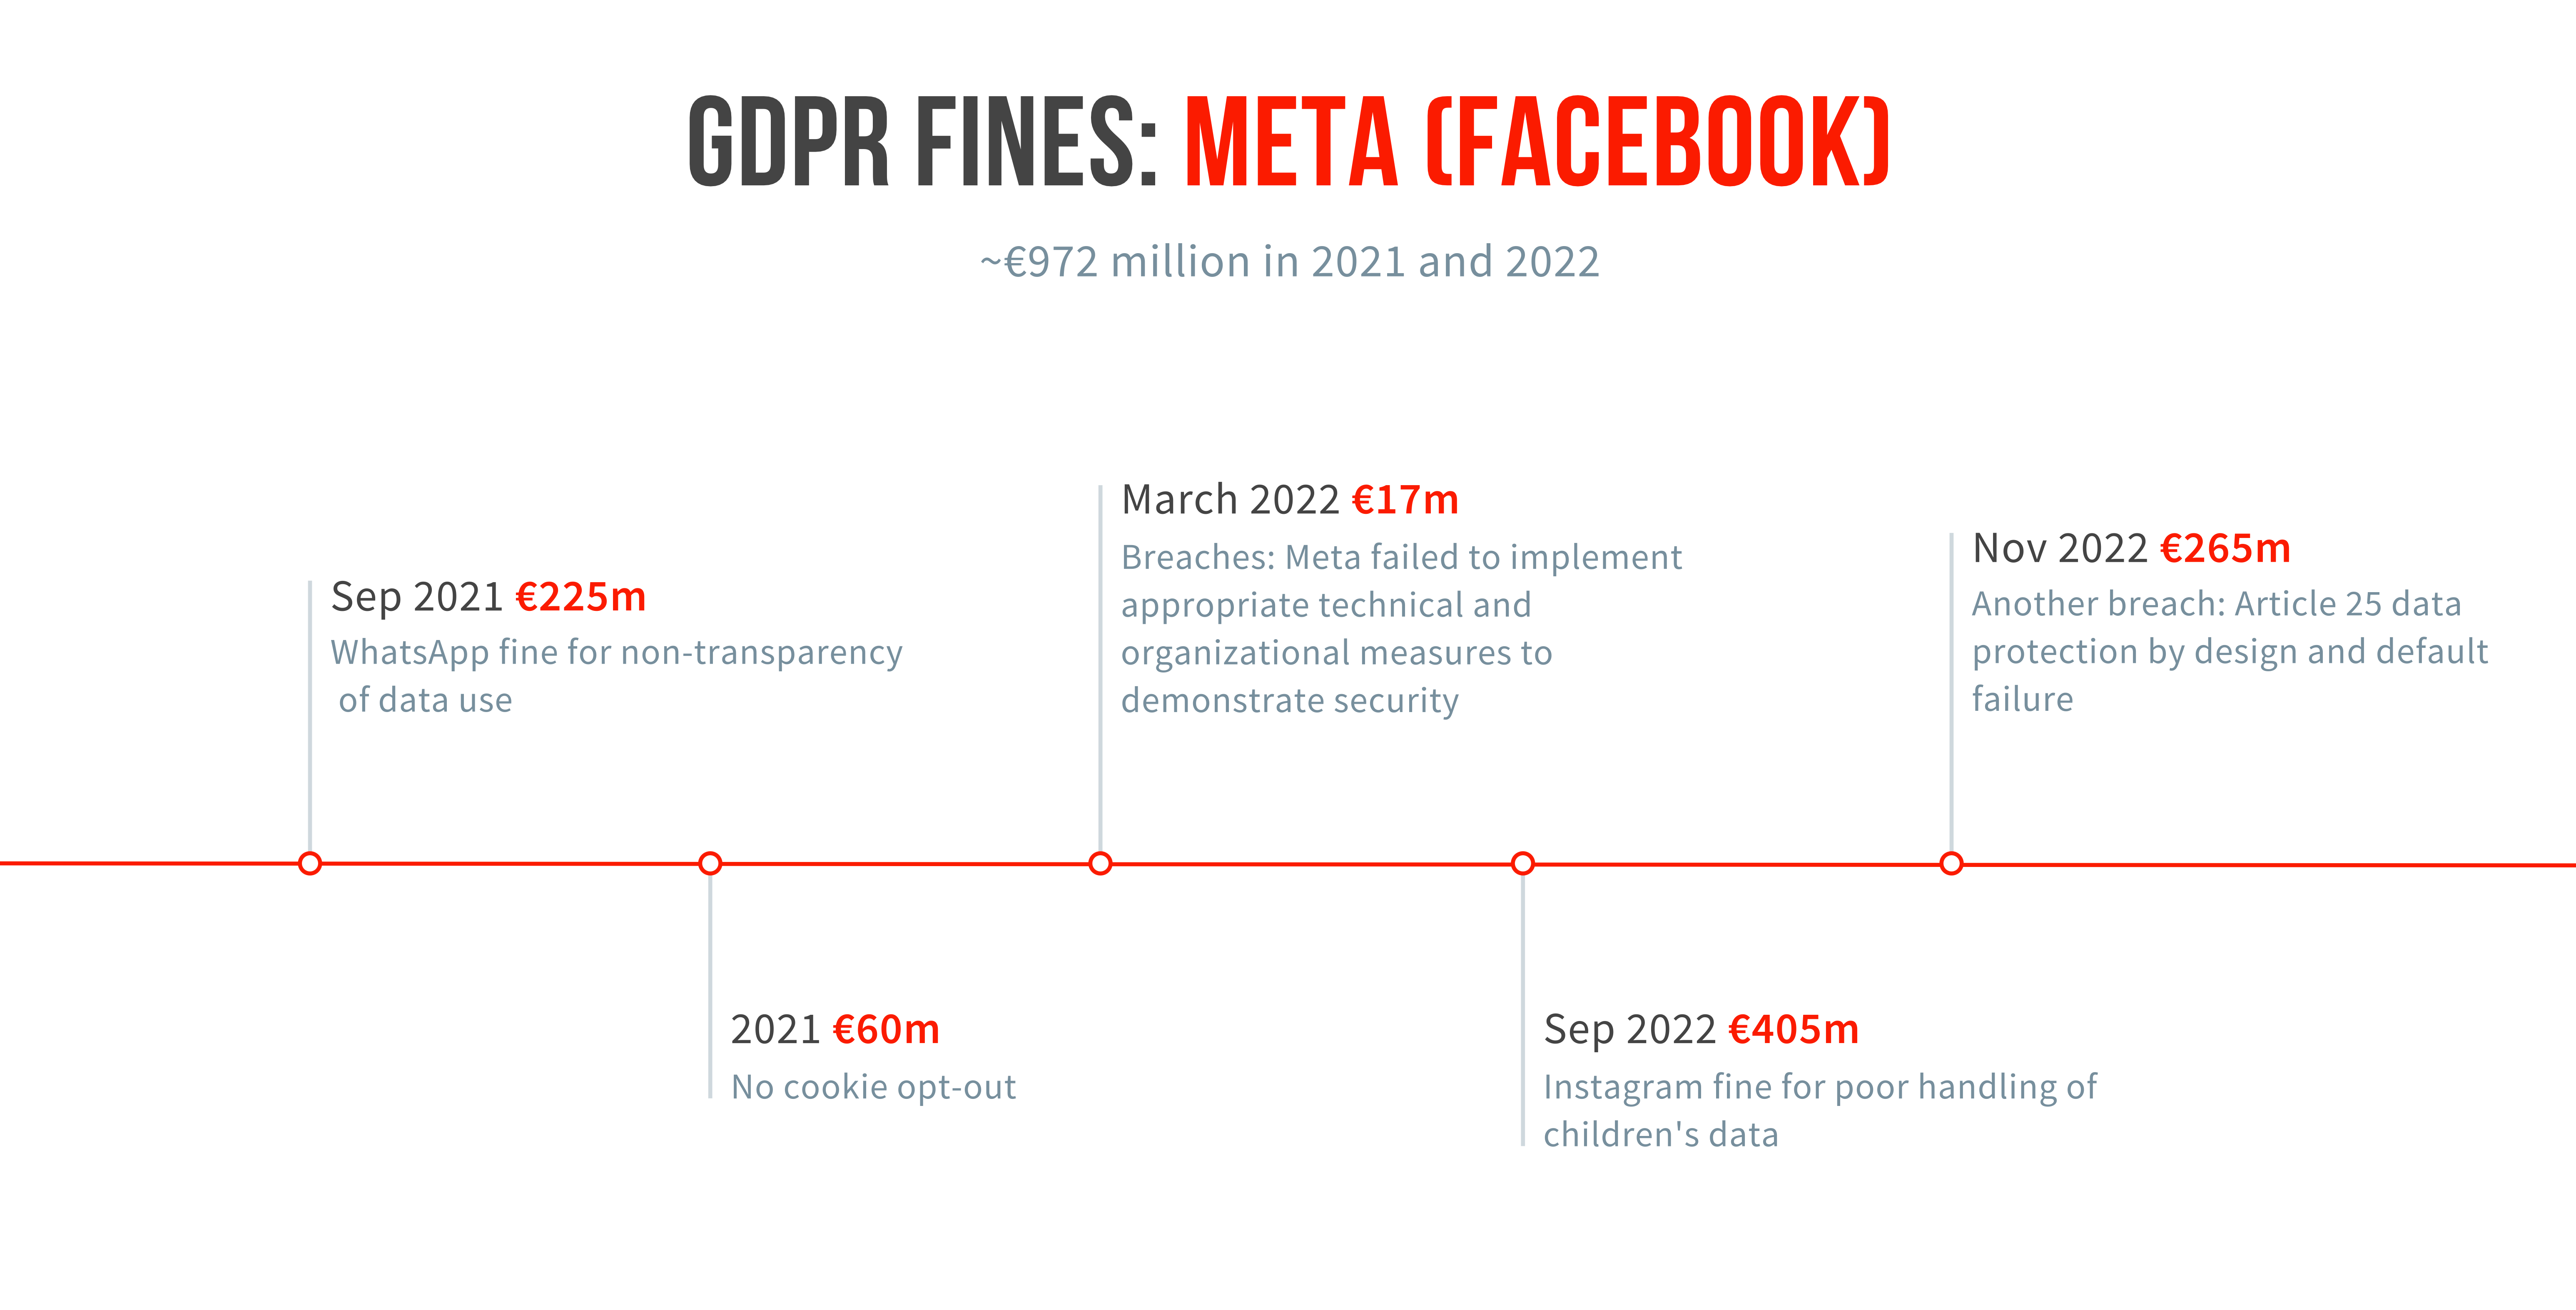 GDPR fines against Meta in 2021 and 2022 total almost $1 billion euros